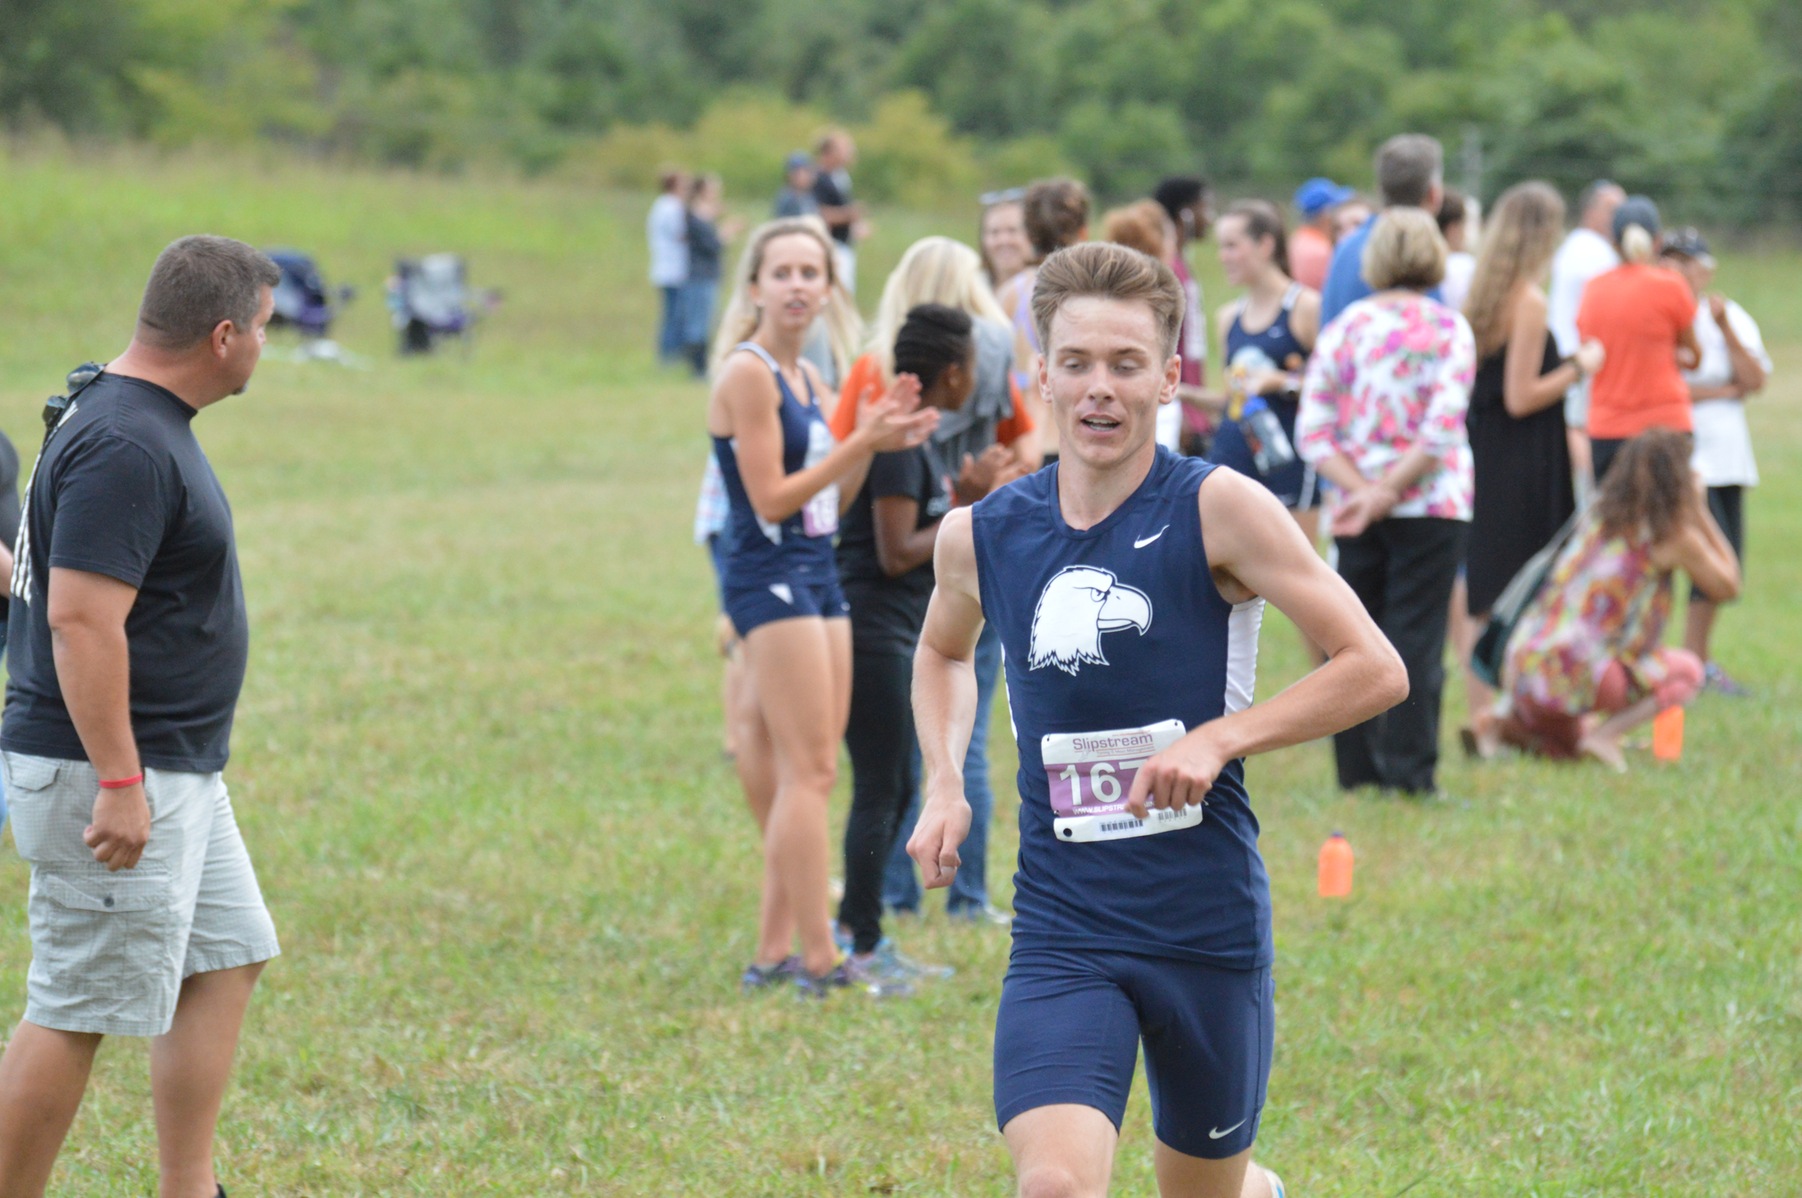 Greer Gliding into Cross Country Record Books